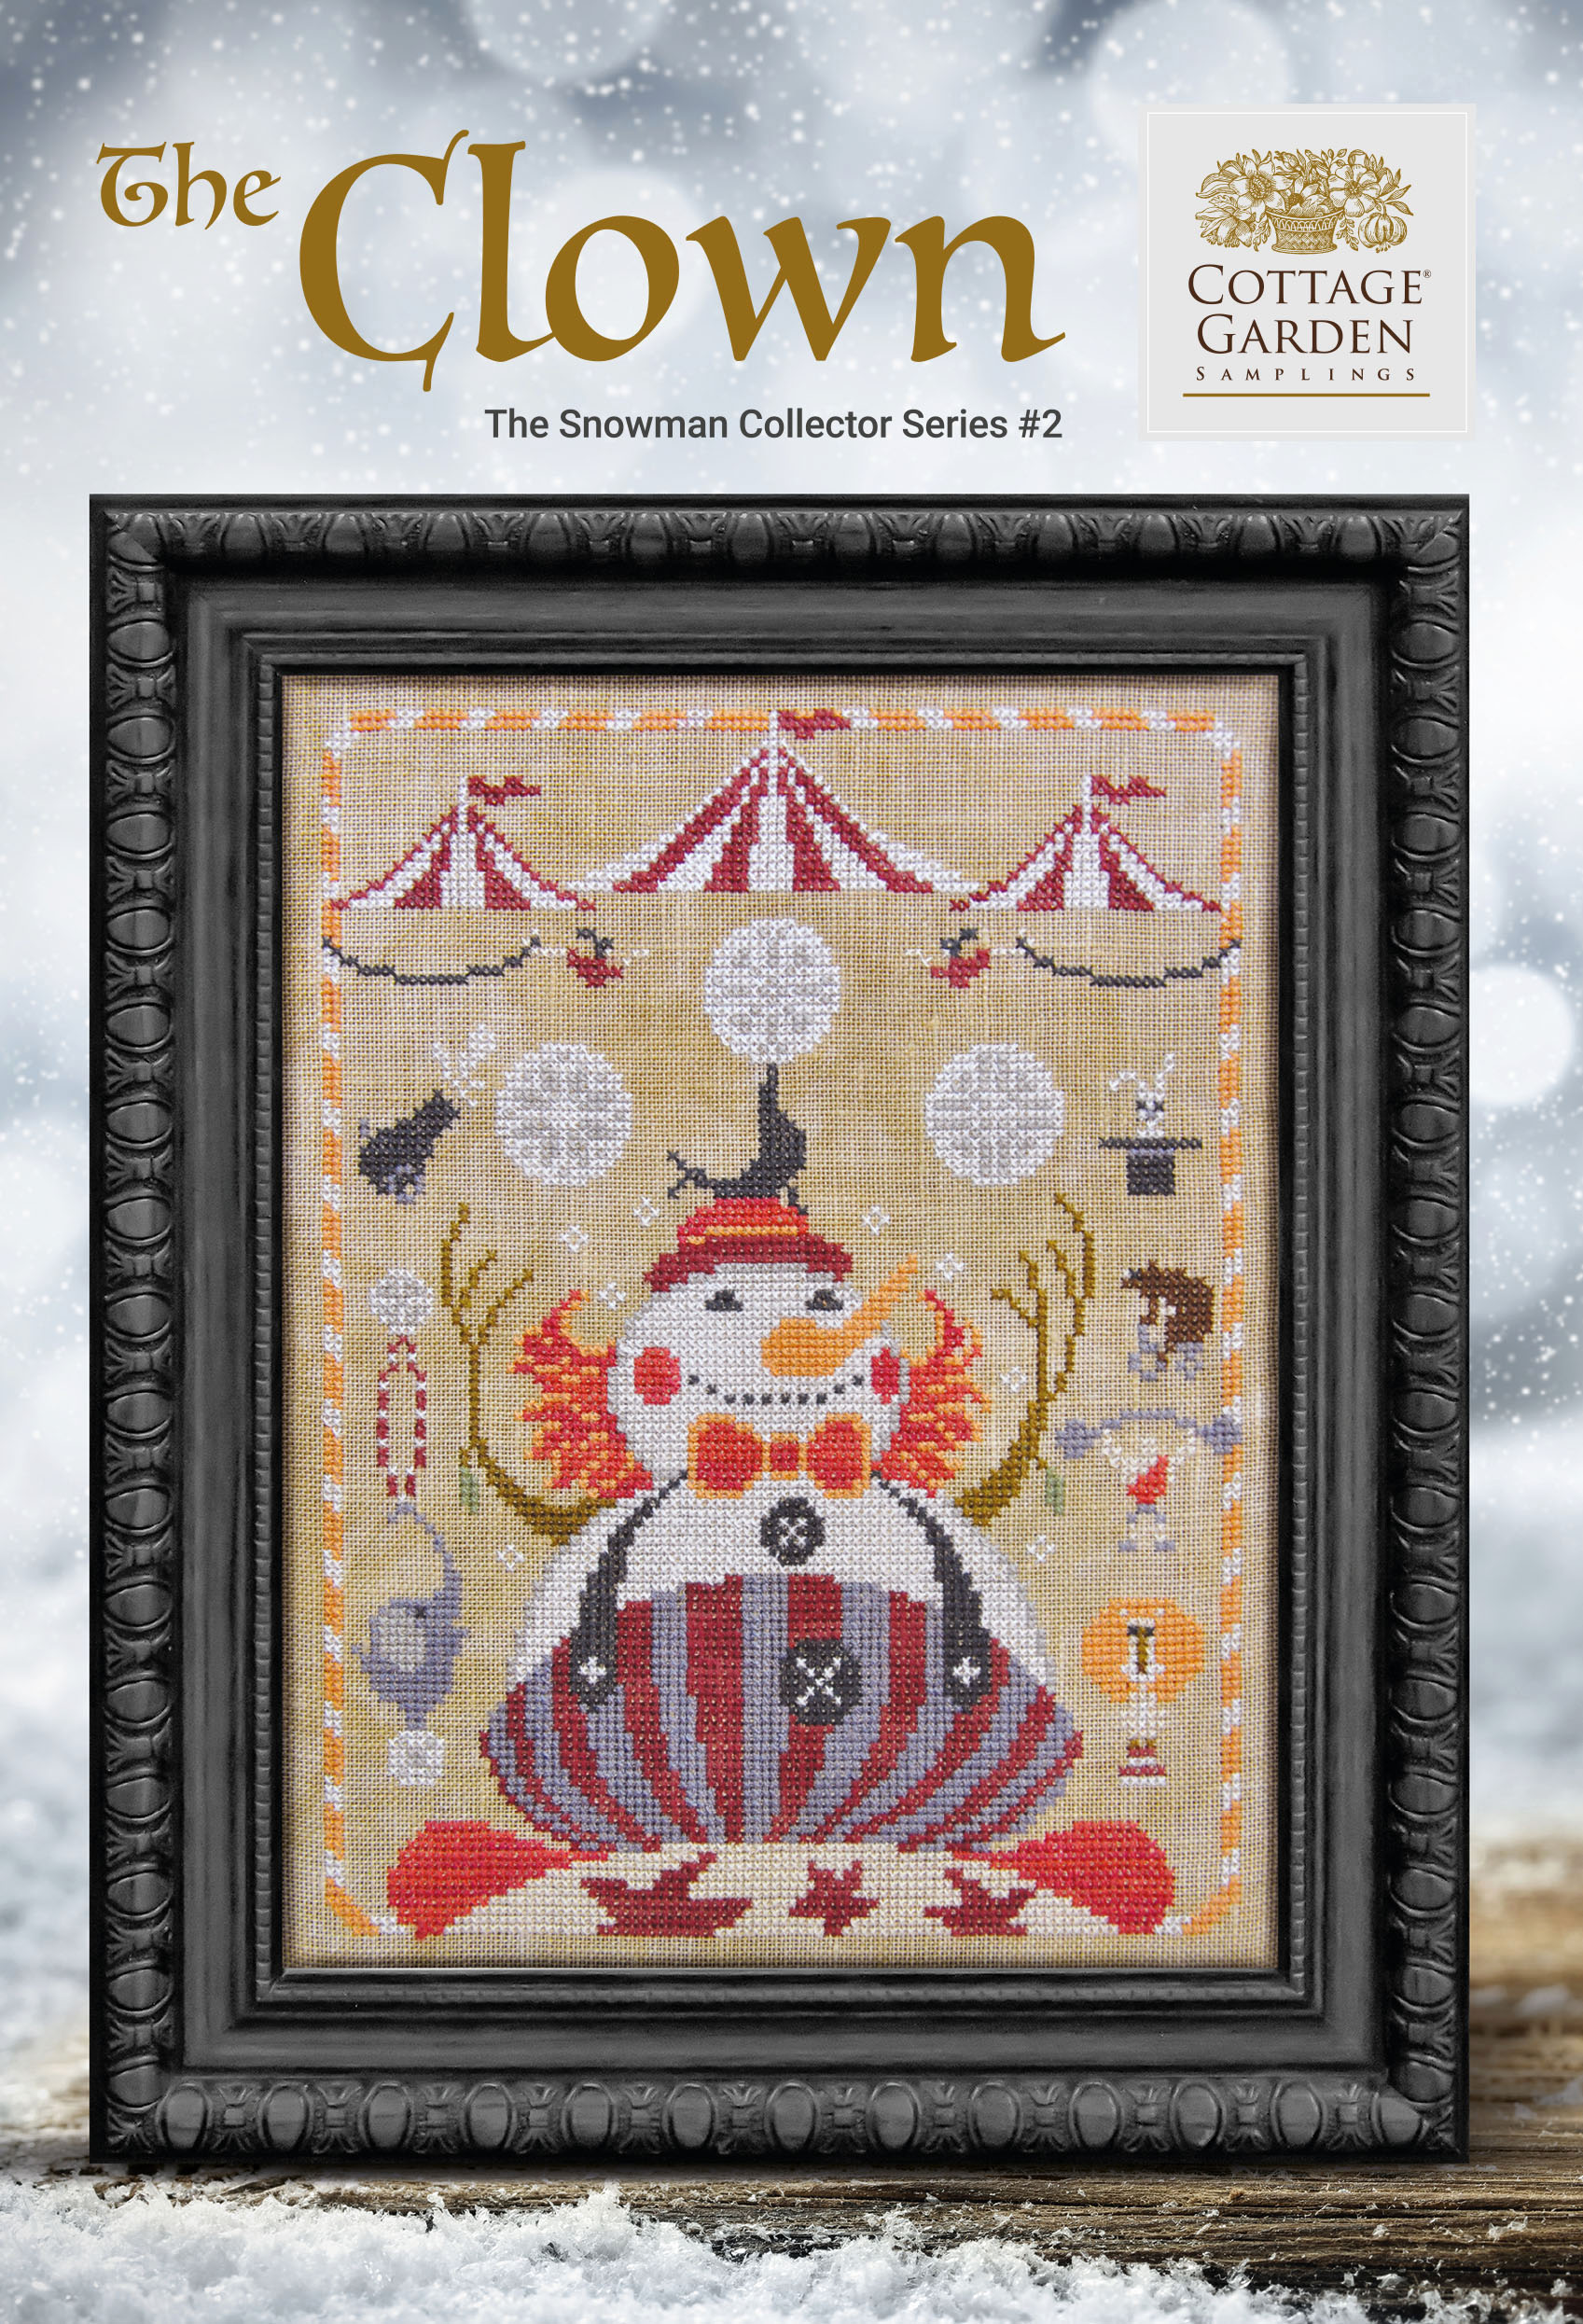 The Snowman Collection - Series 2 - The Clown  by Cottage Garden Samplings 